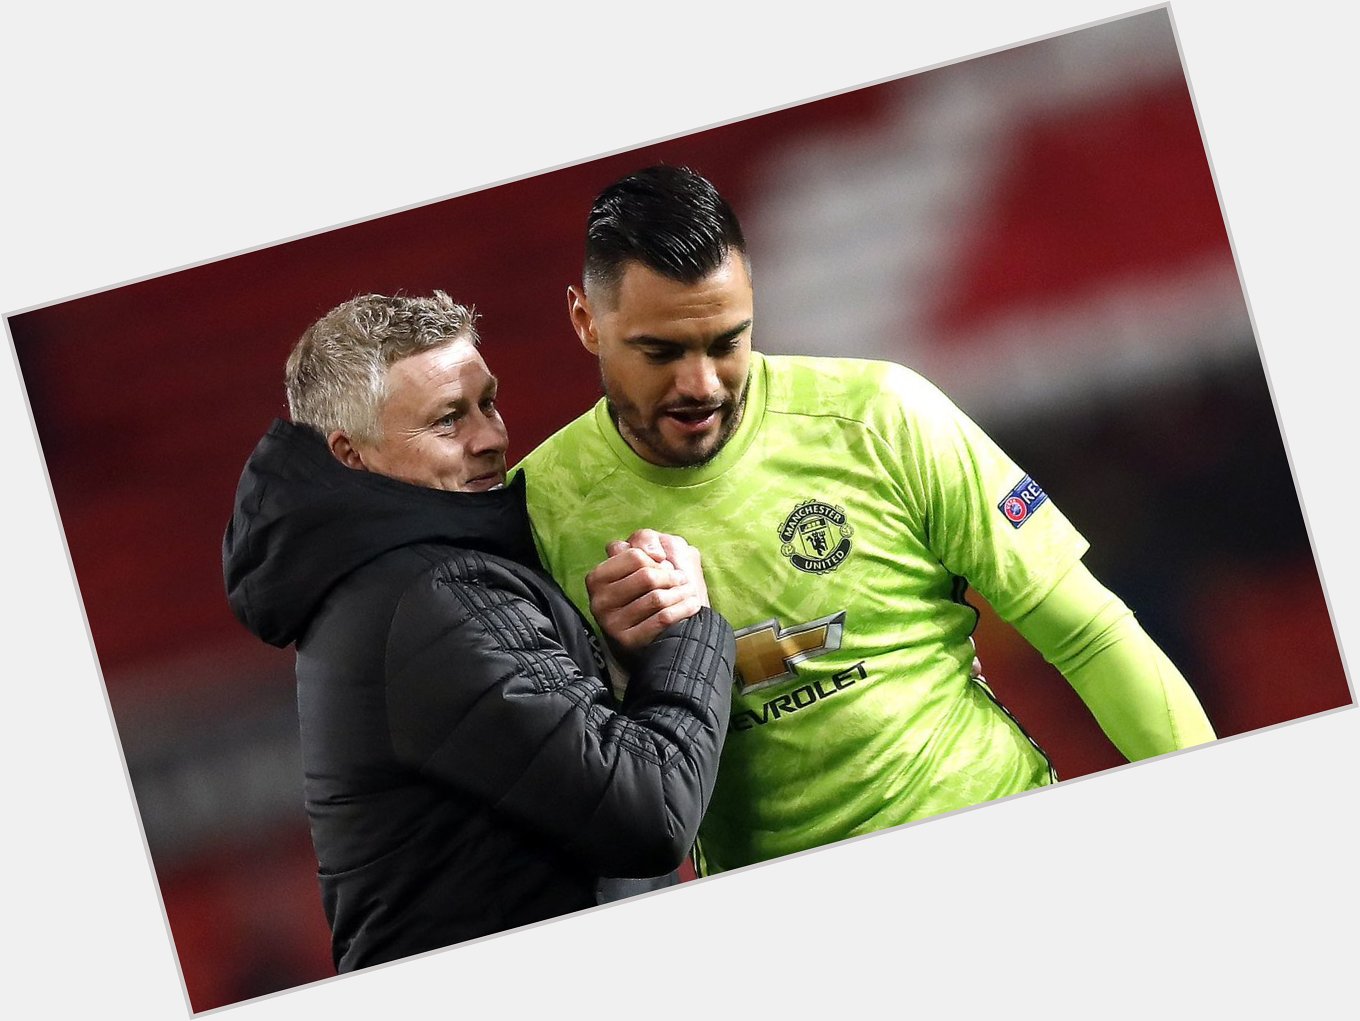 Happy 33rd birthday to Sergio Romero. 55 games
35 clean sheets
25 goals conceded

Best backup in the world 